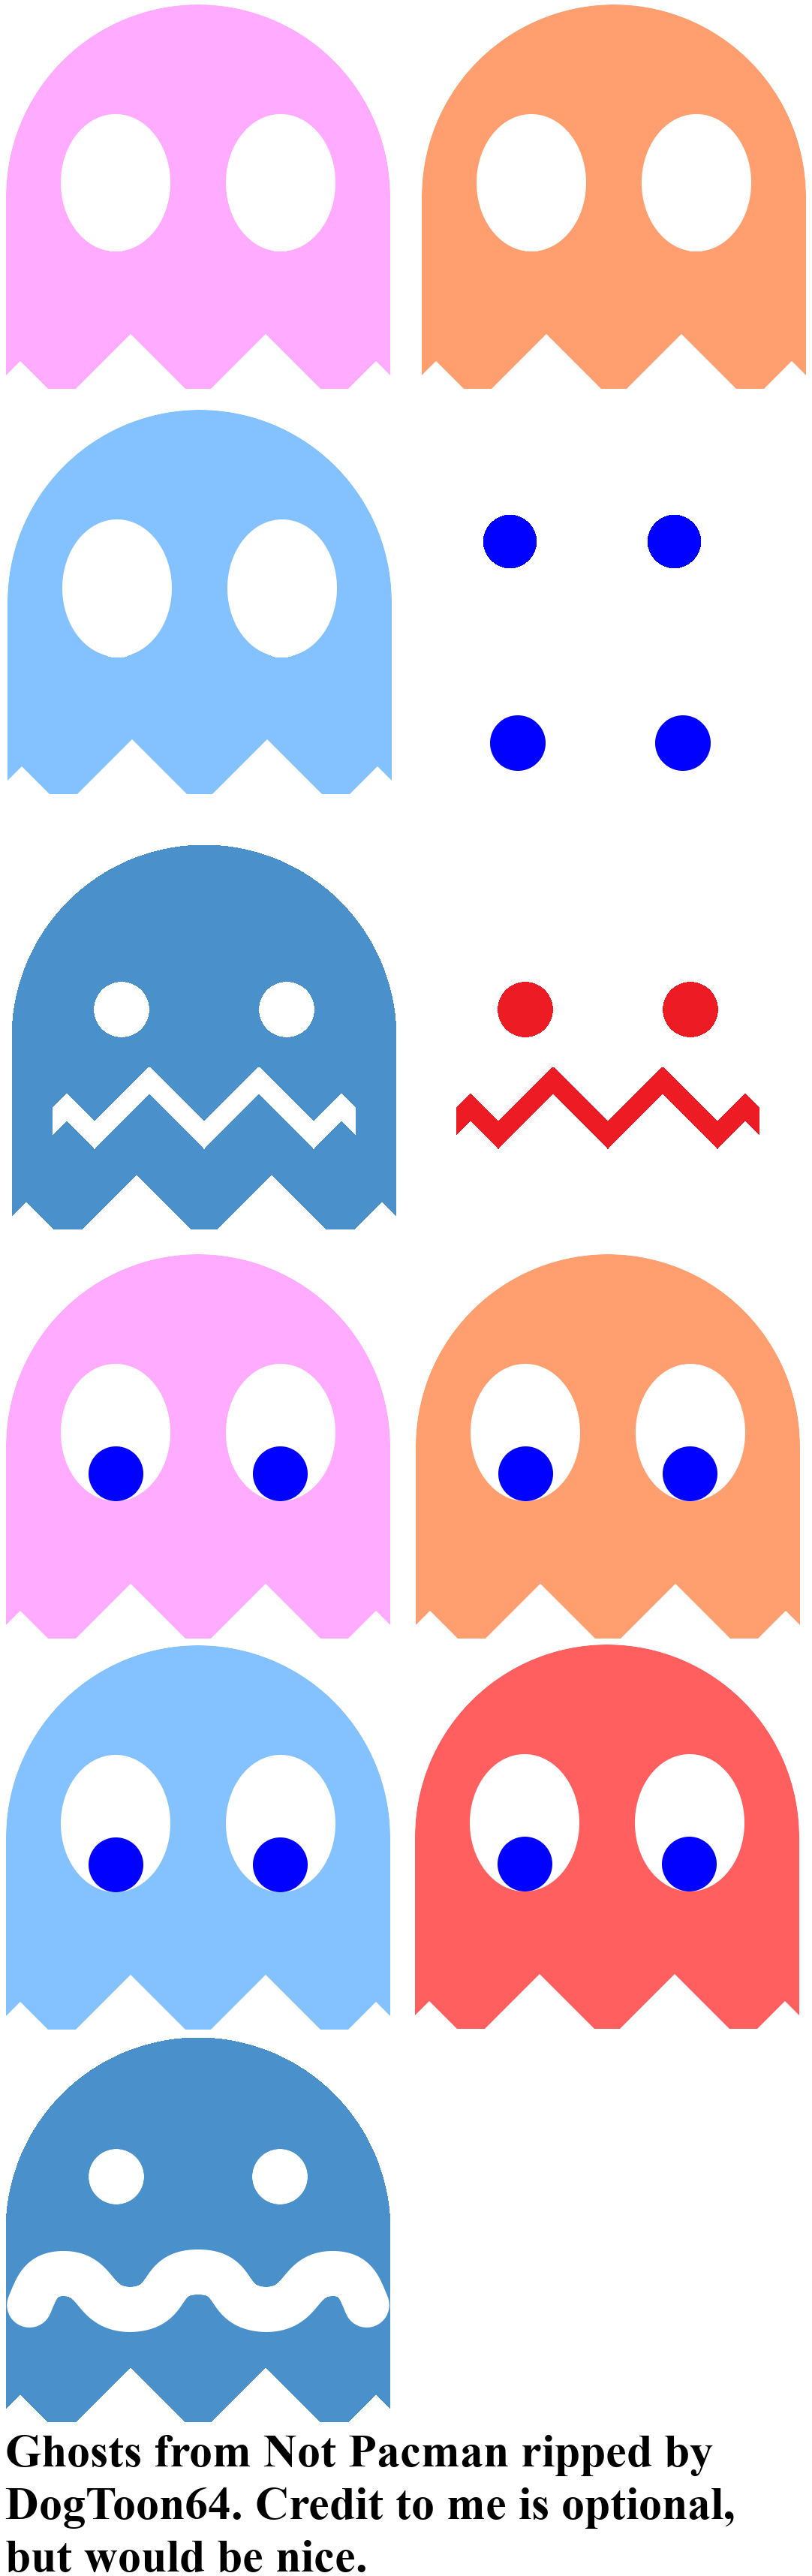 Not Pac-Man - Ghosts